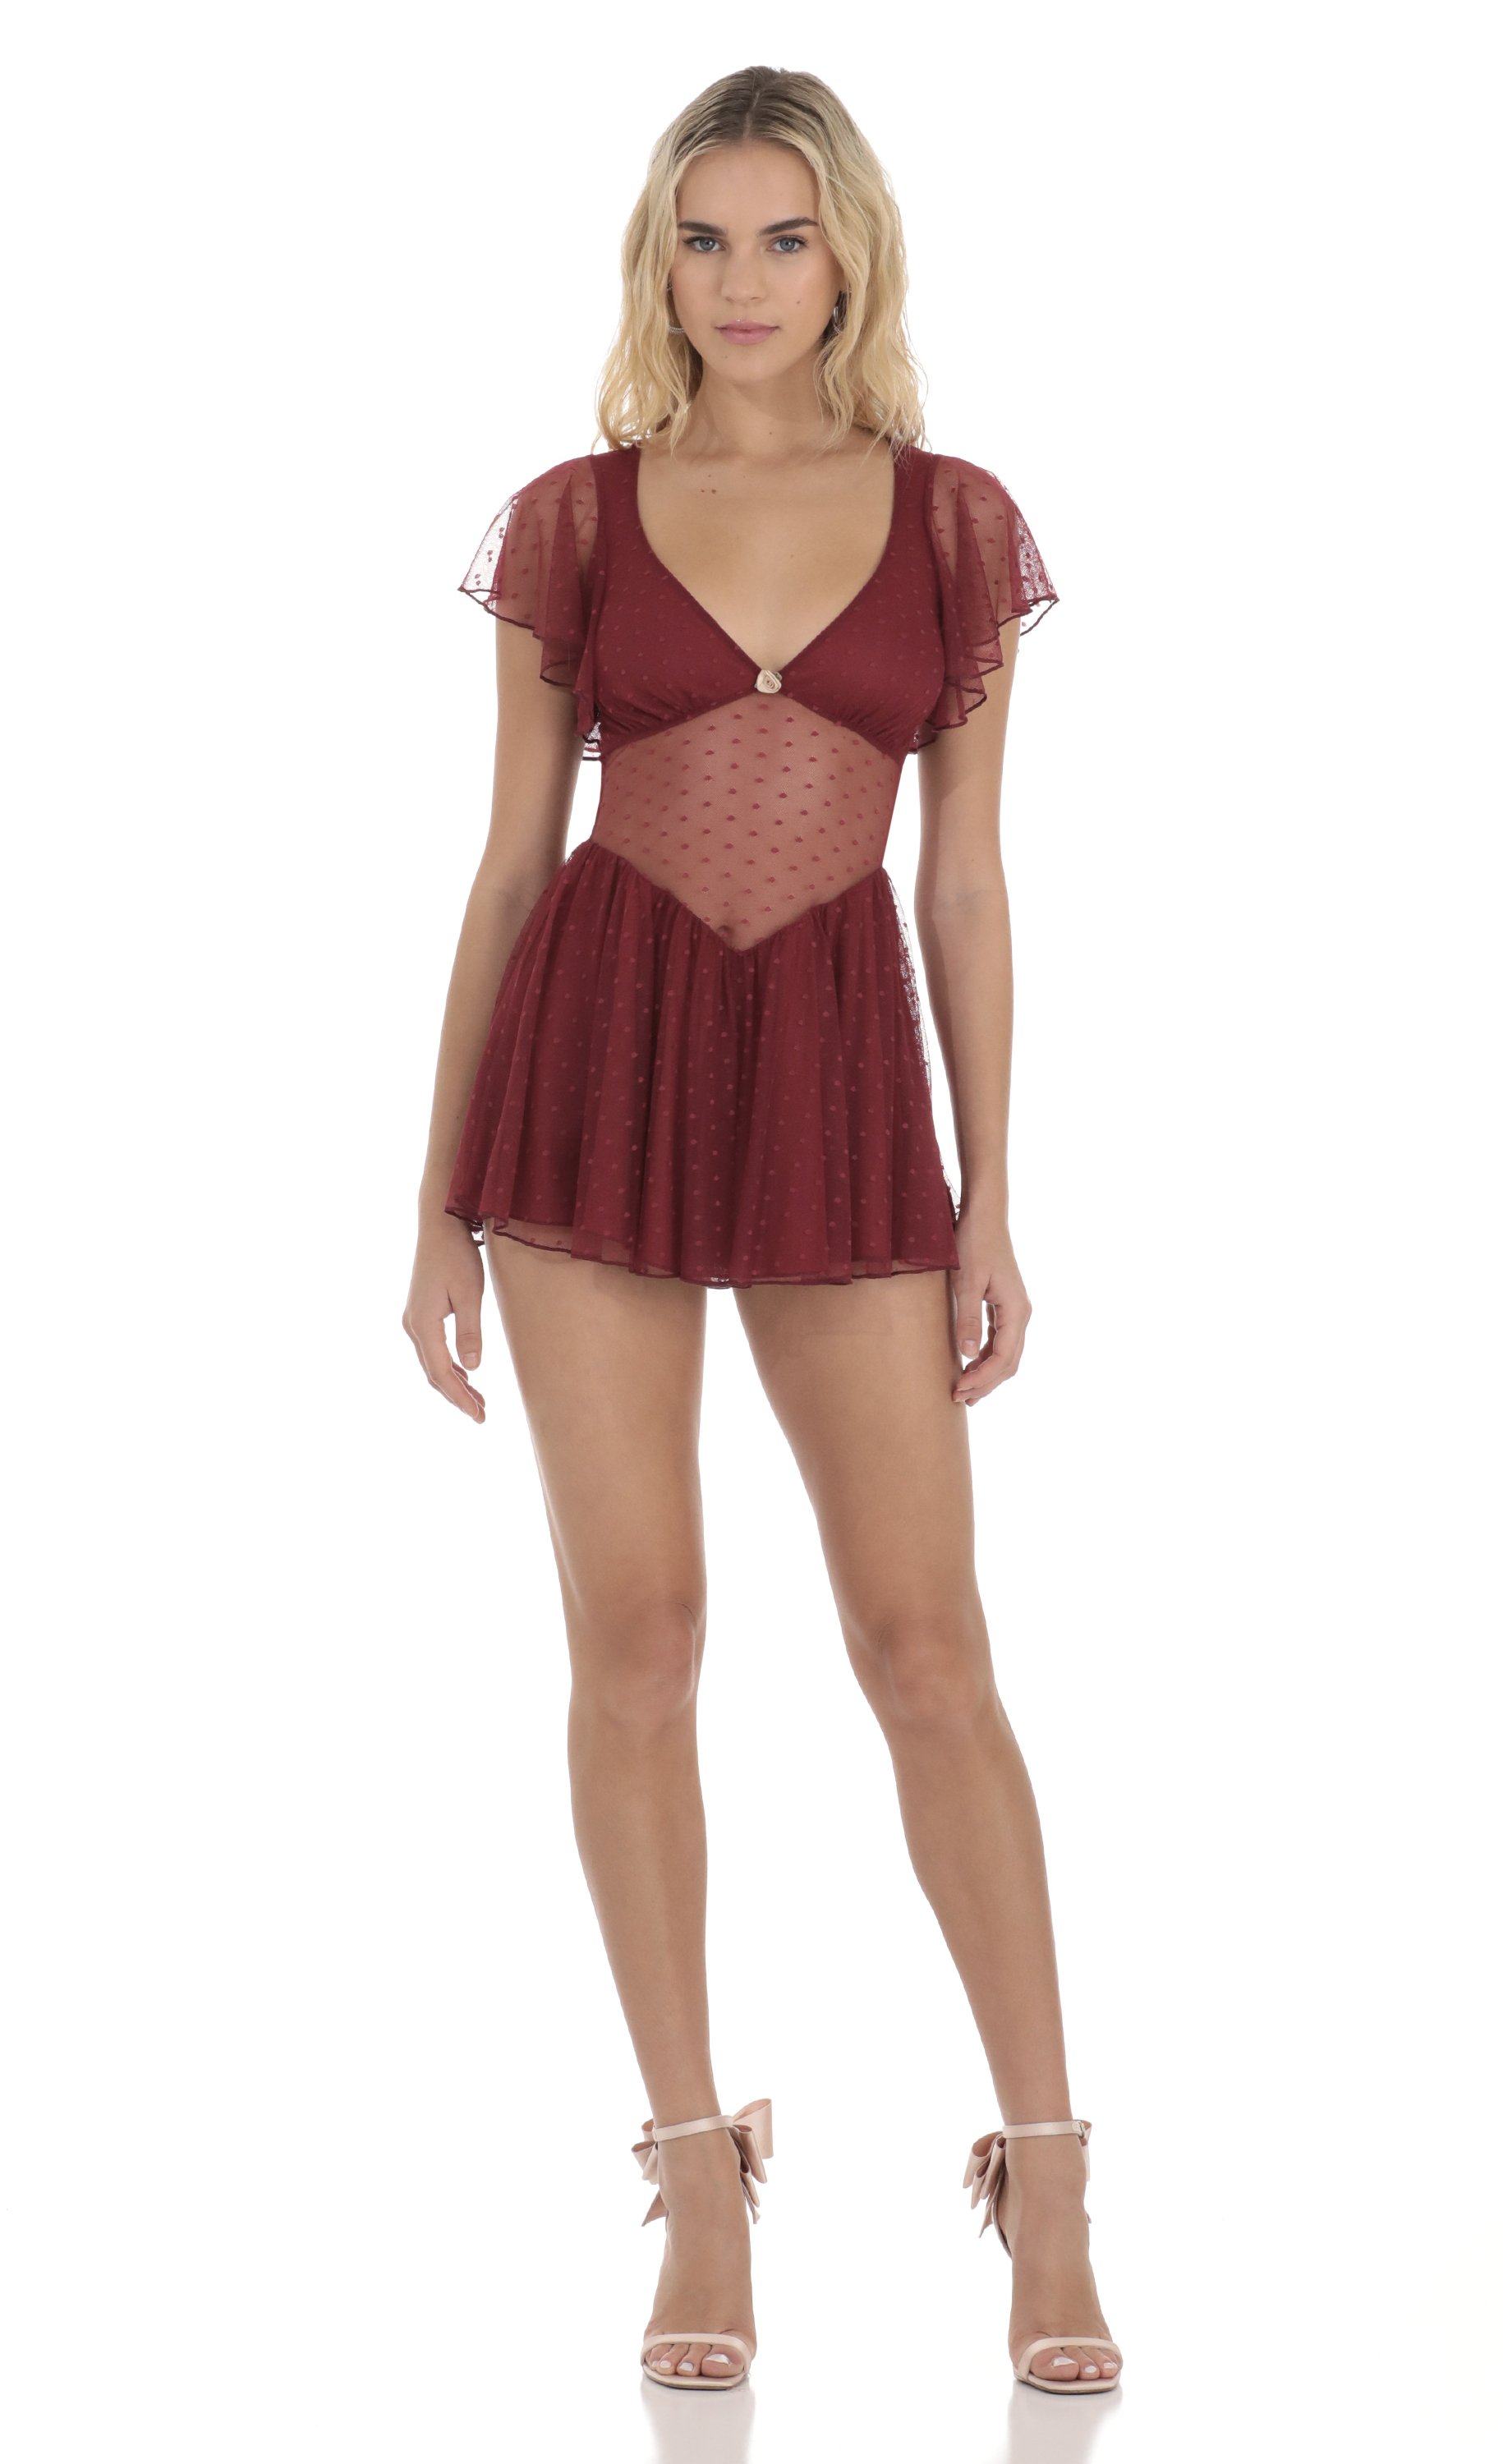 Dotted Mesh Cutout Dress in Maroon